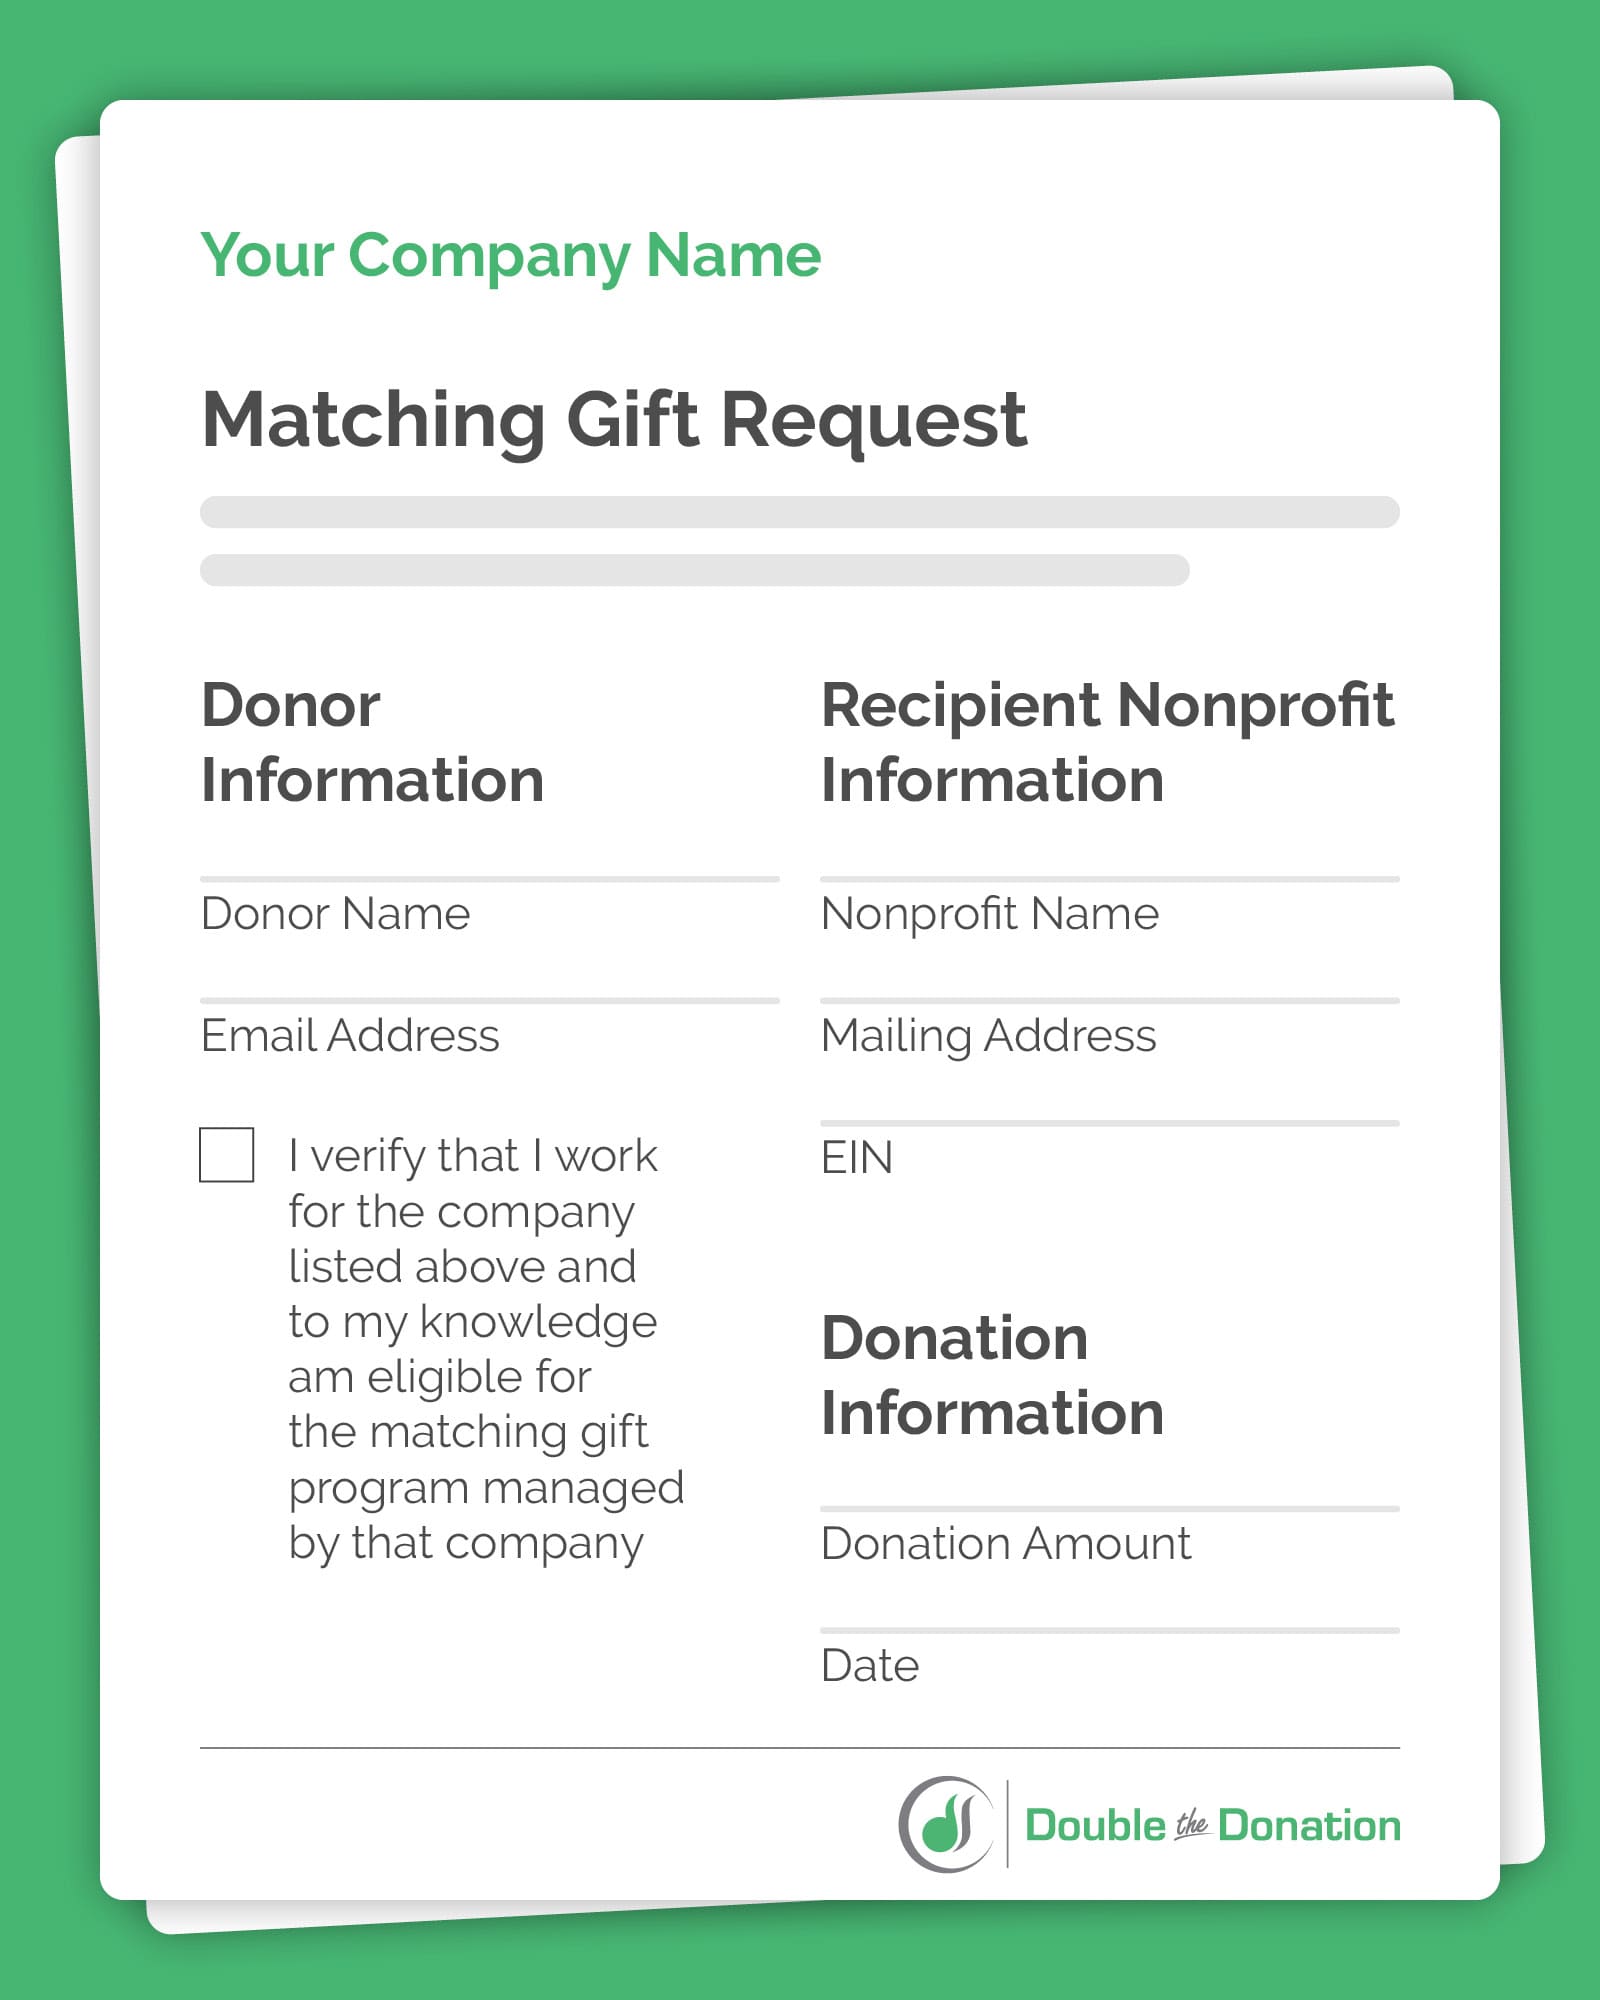 Starting a matching gift program with Double the Donation's standard match form